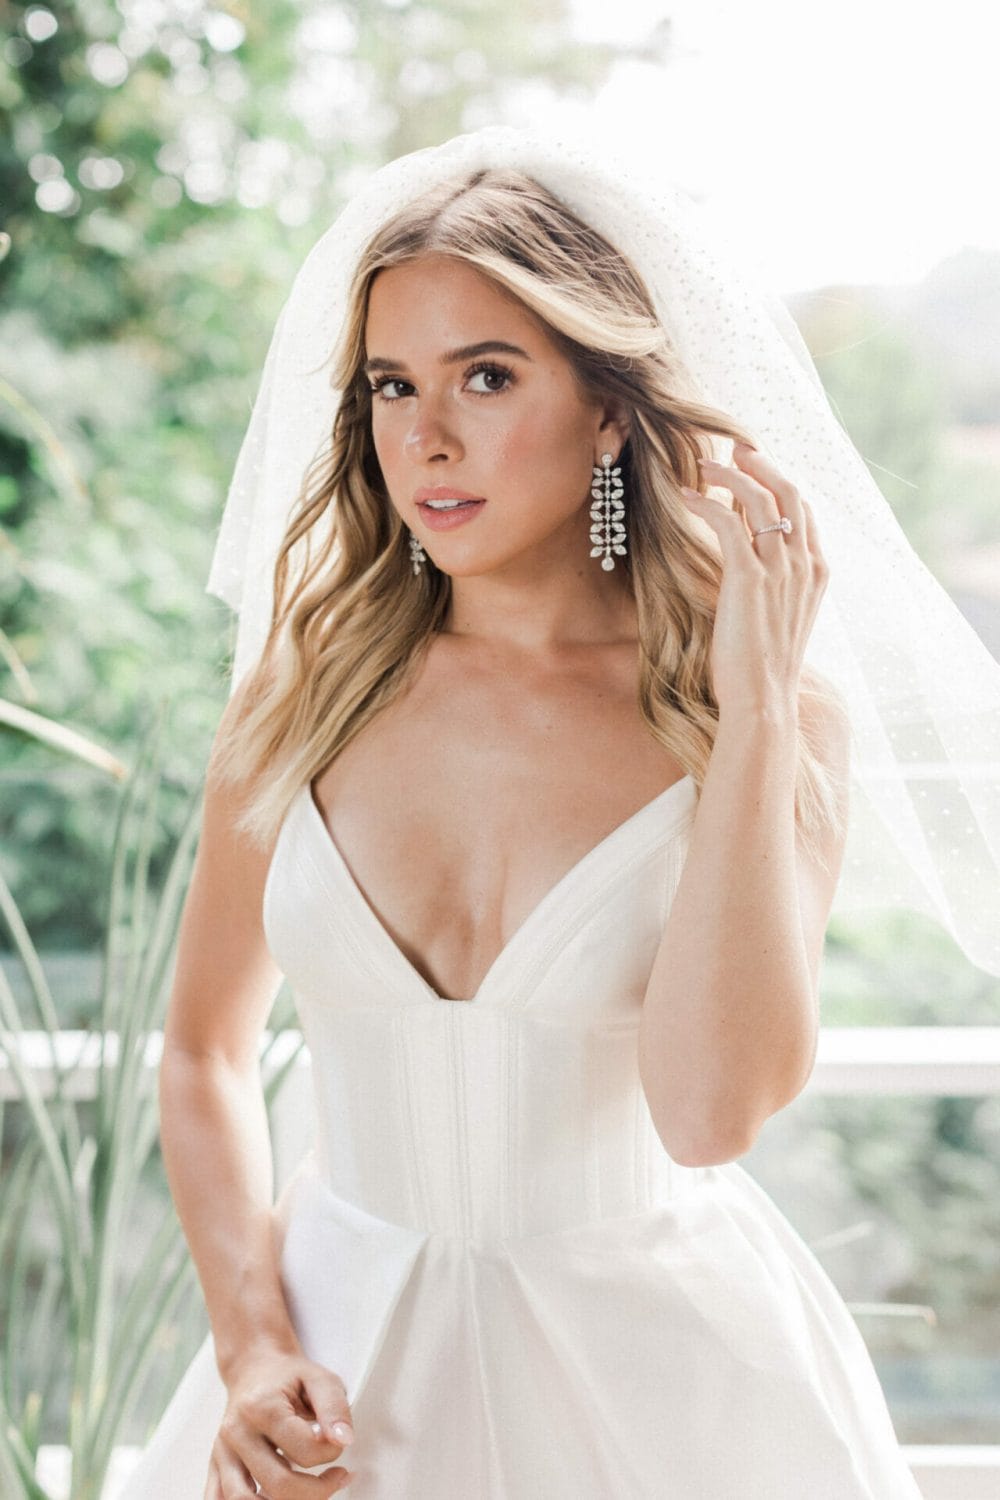 Kelianne Chase BRIDES Valorie Darling Photography LOOK 02 0202 Edit scaled